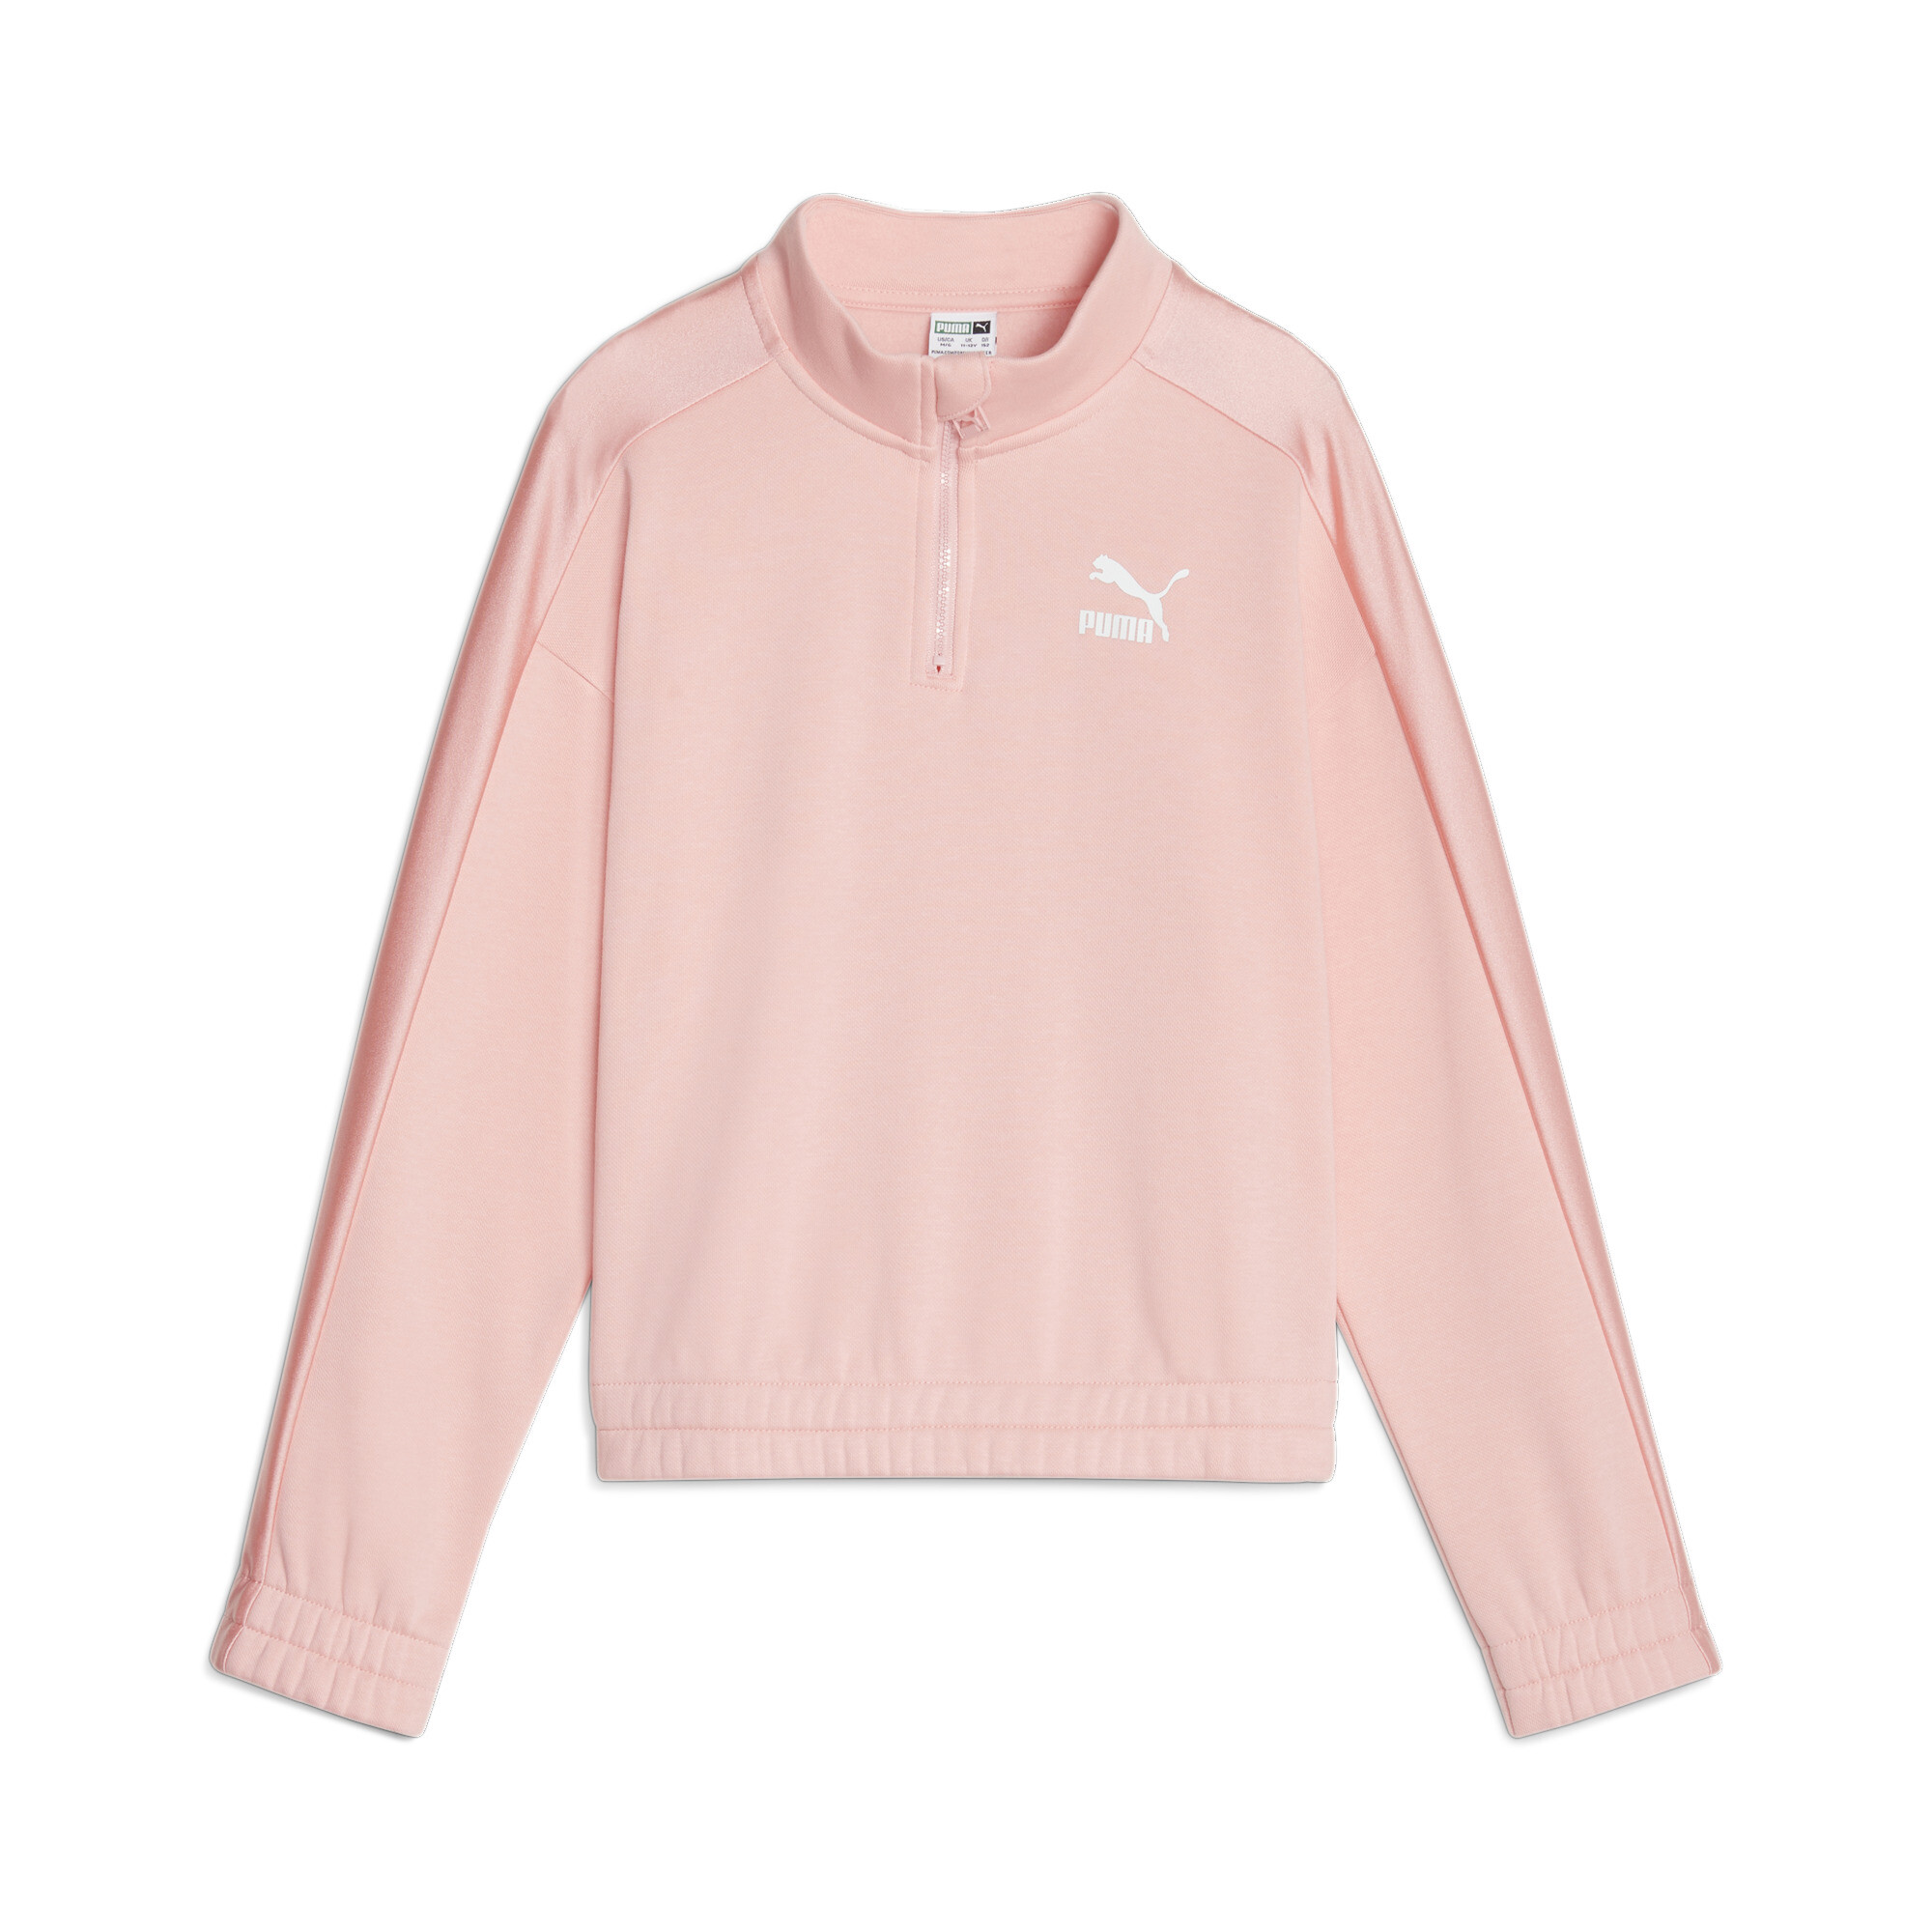 Women's Puma T7 Youth Quarter-Zip Top, Pink Top, Size 13-14Y Top, Clothing